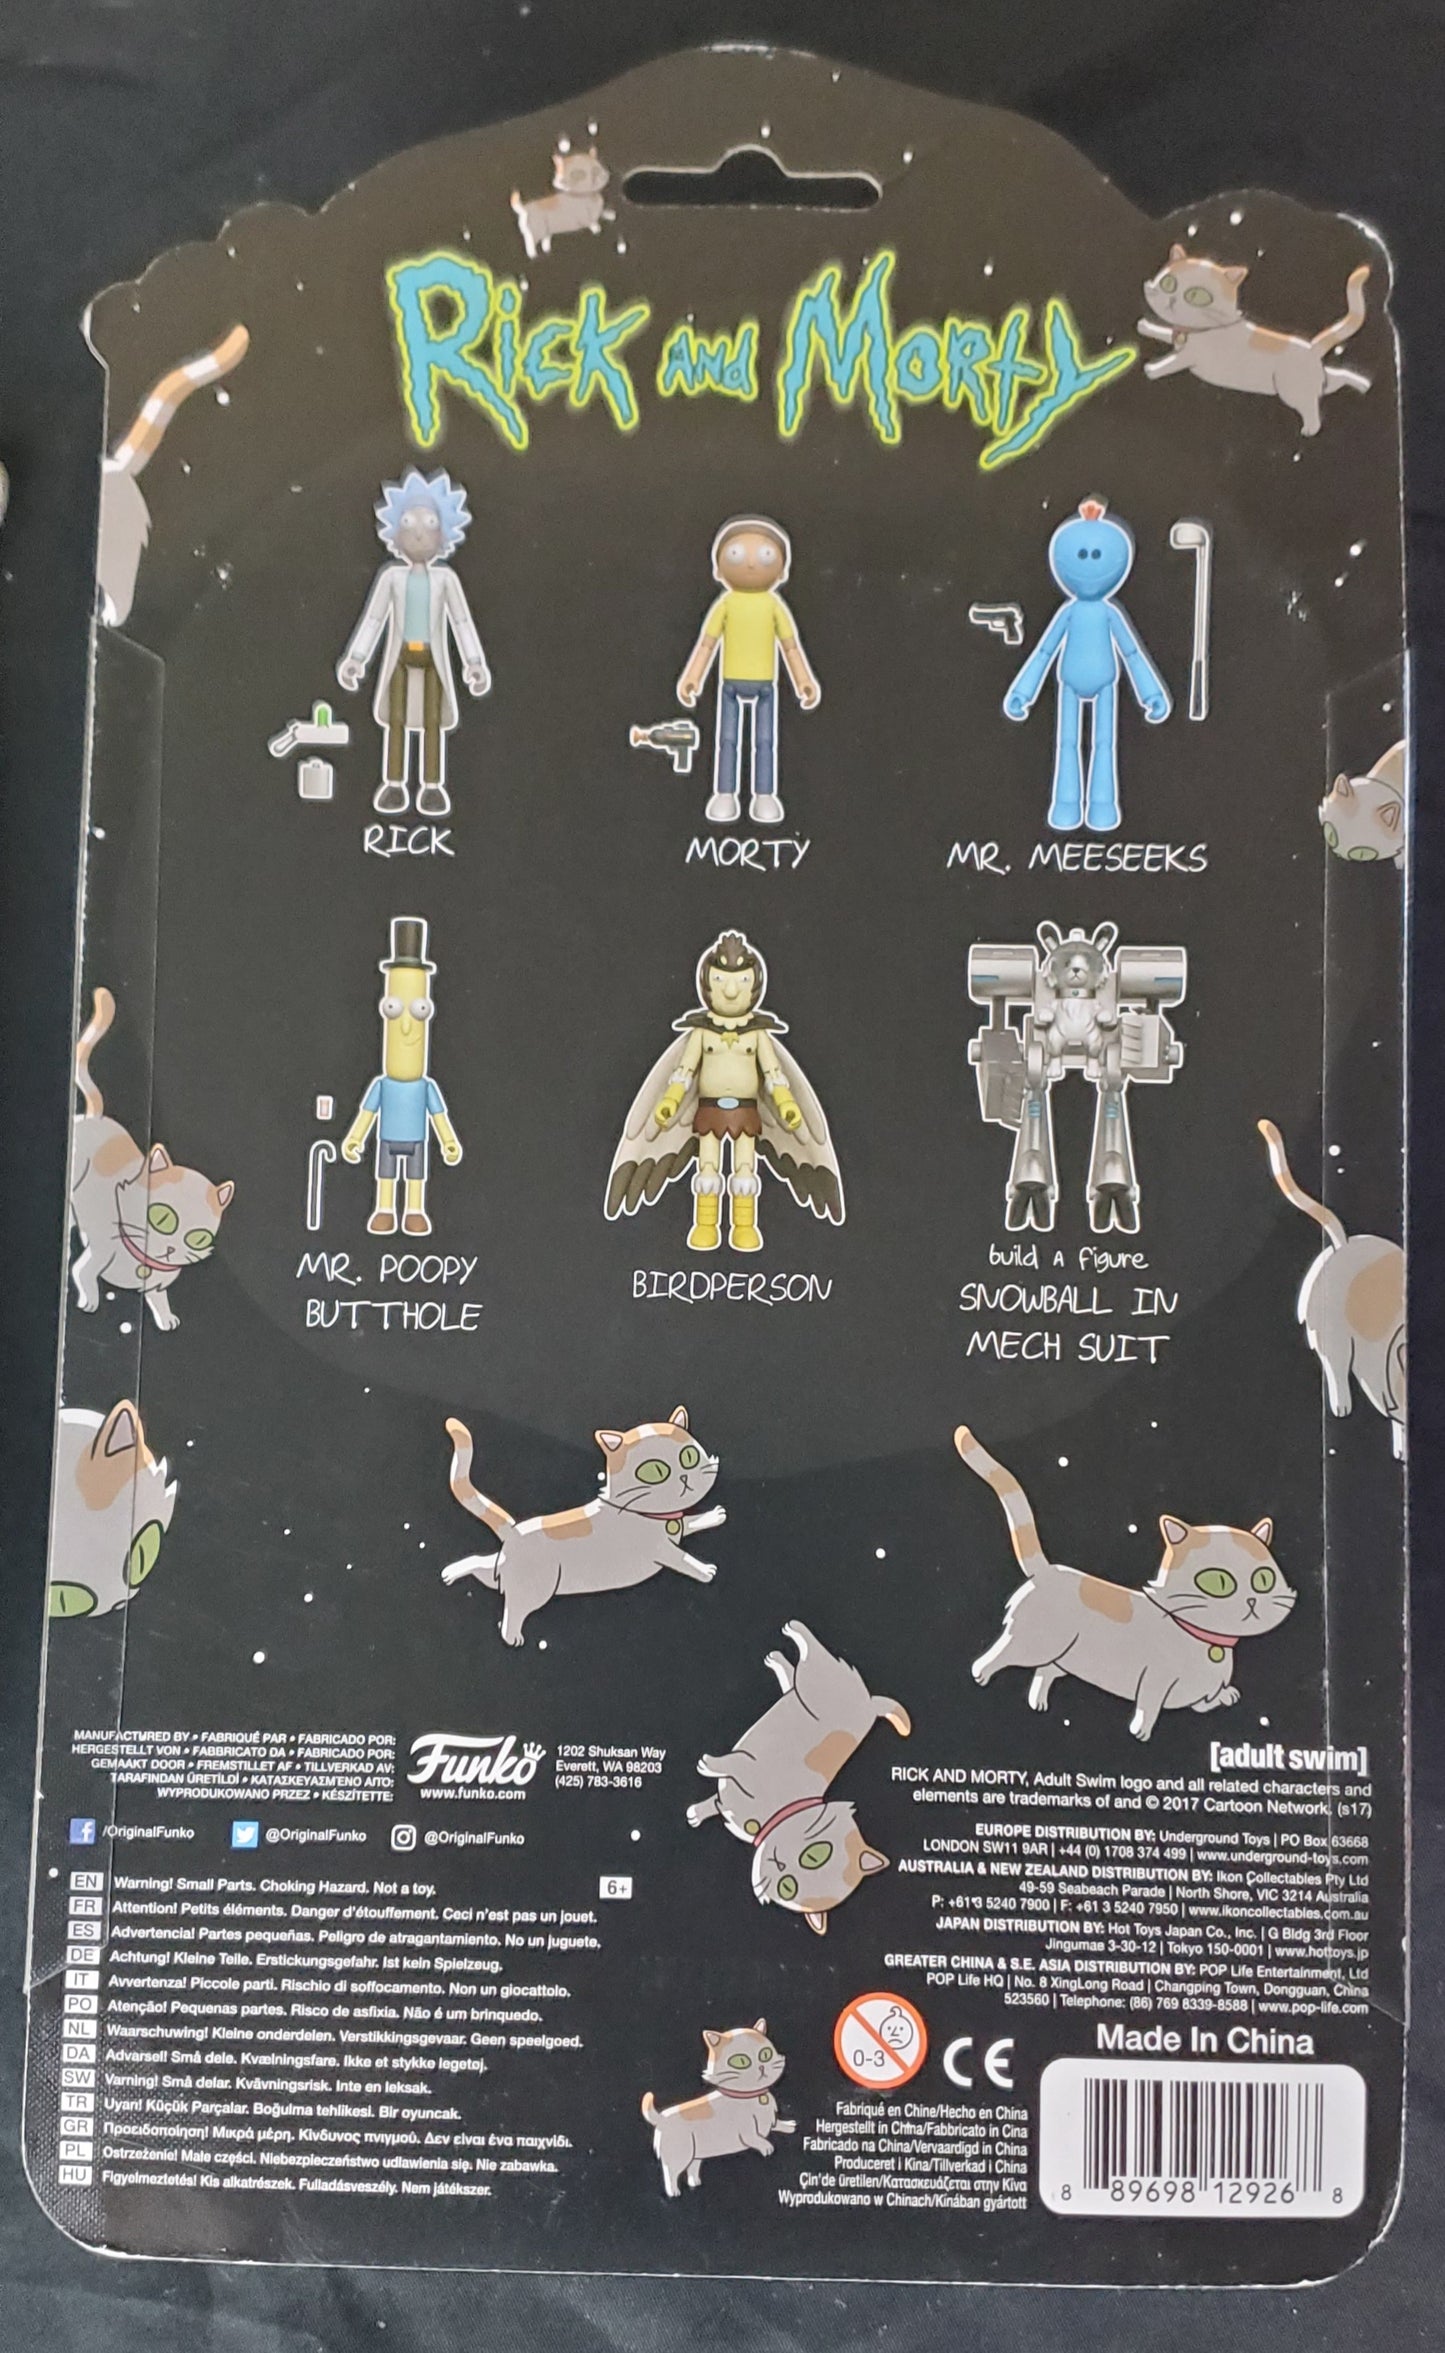 Rick and Morty Mr. Poopy Butthole Action Figure